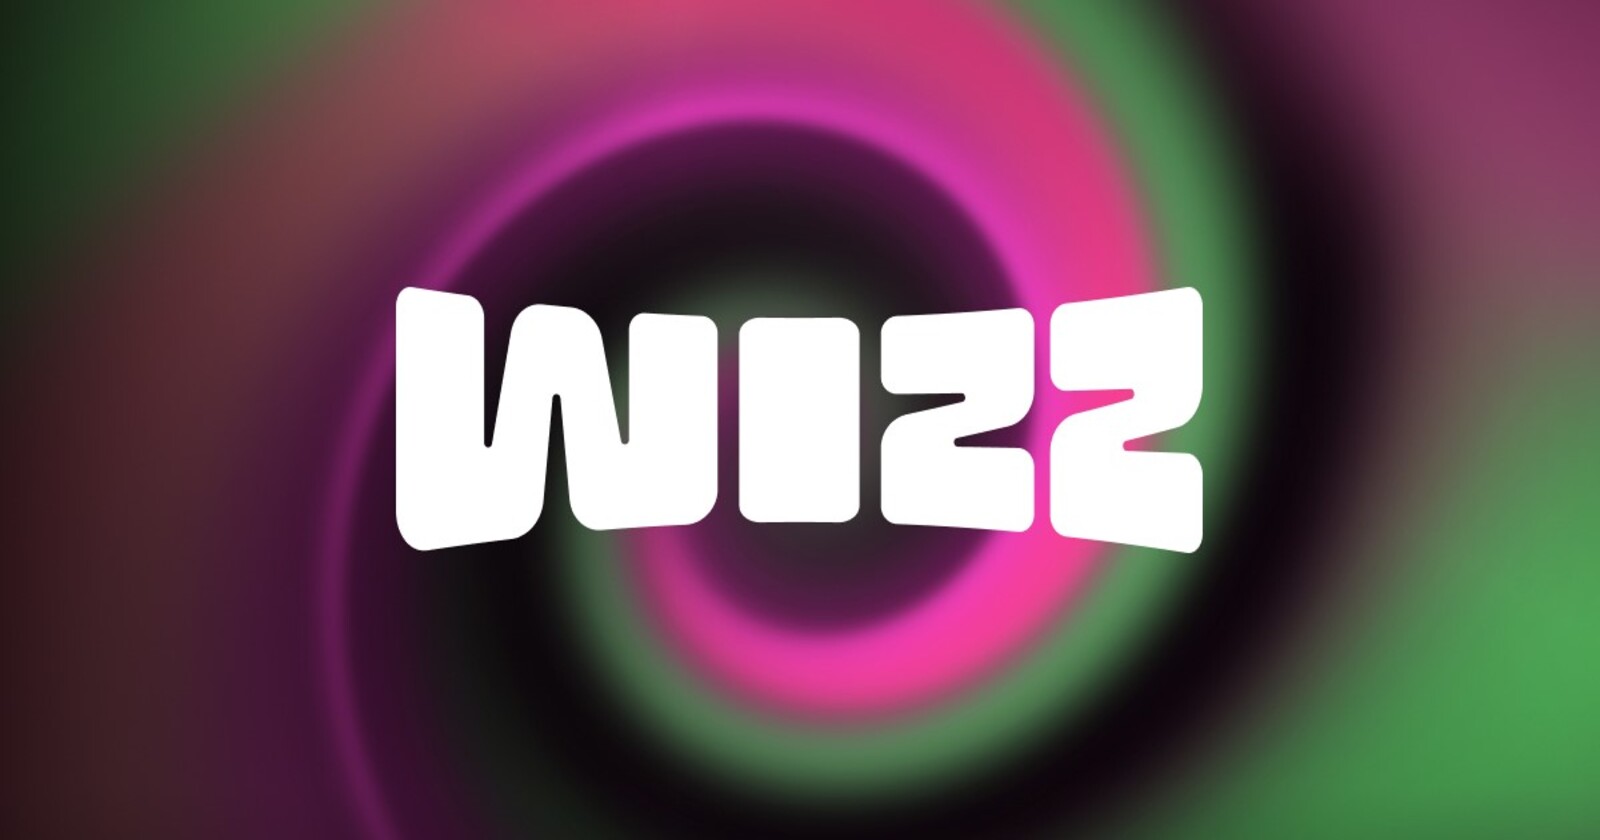 Wizz App gets knocked off from Play Store & App Store due to 